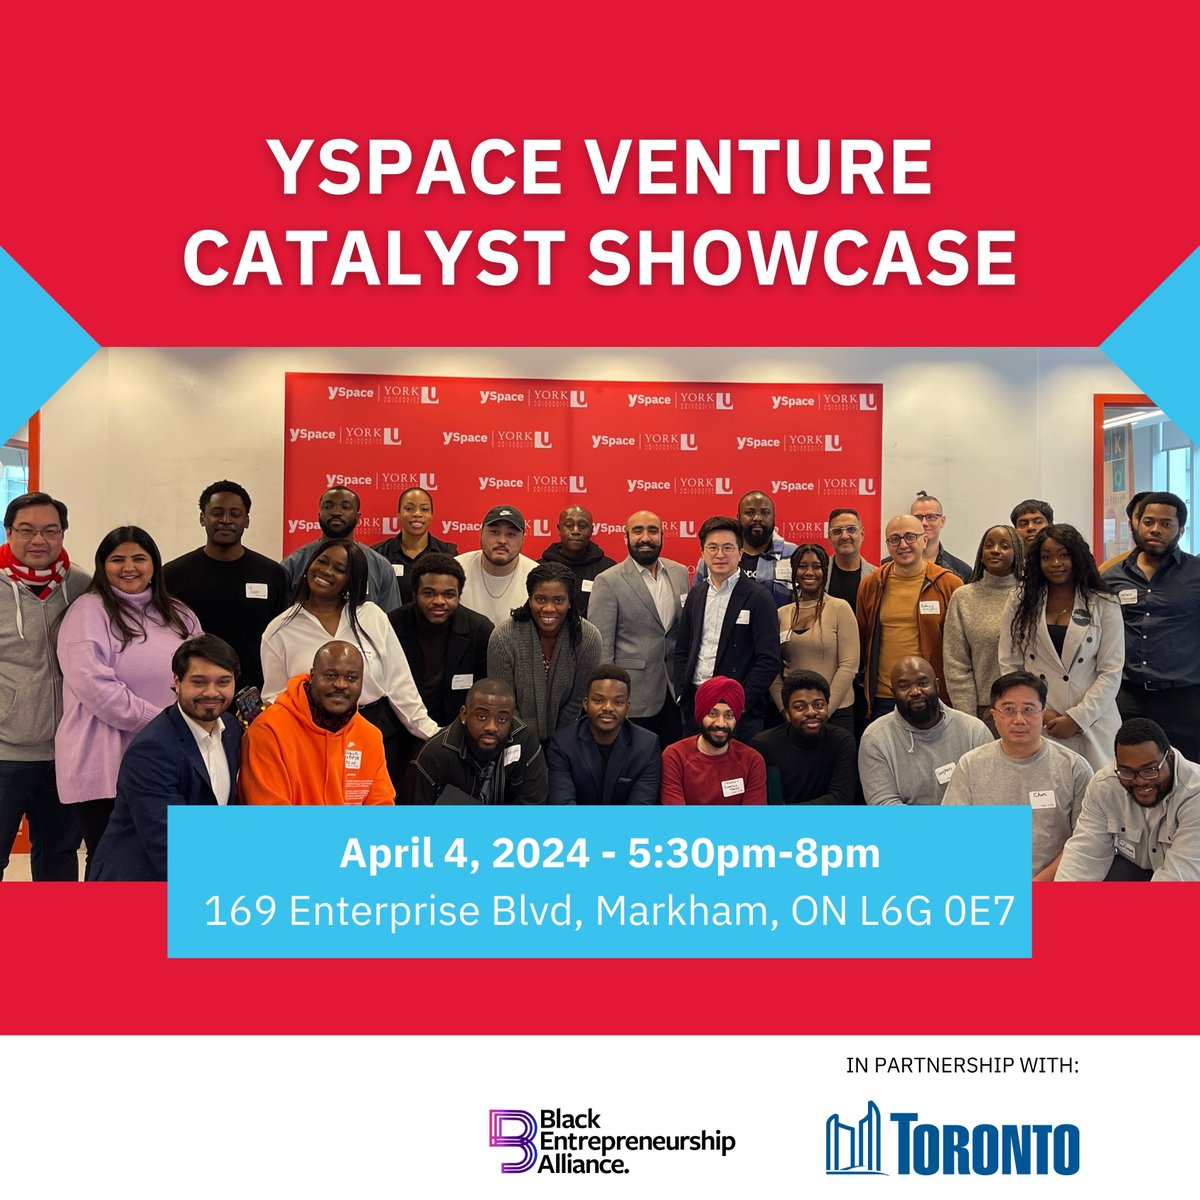 Join us for an evening of innovation and collaborative spirit at our 2024 Venture Catalyst Showcase on April 4th from 5:30pm - 9pm at YSpace Markham! This is the perfect opportunity to network, become inspired, and foster collaboration! RSVP here: lu.ma/vcshowcase